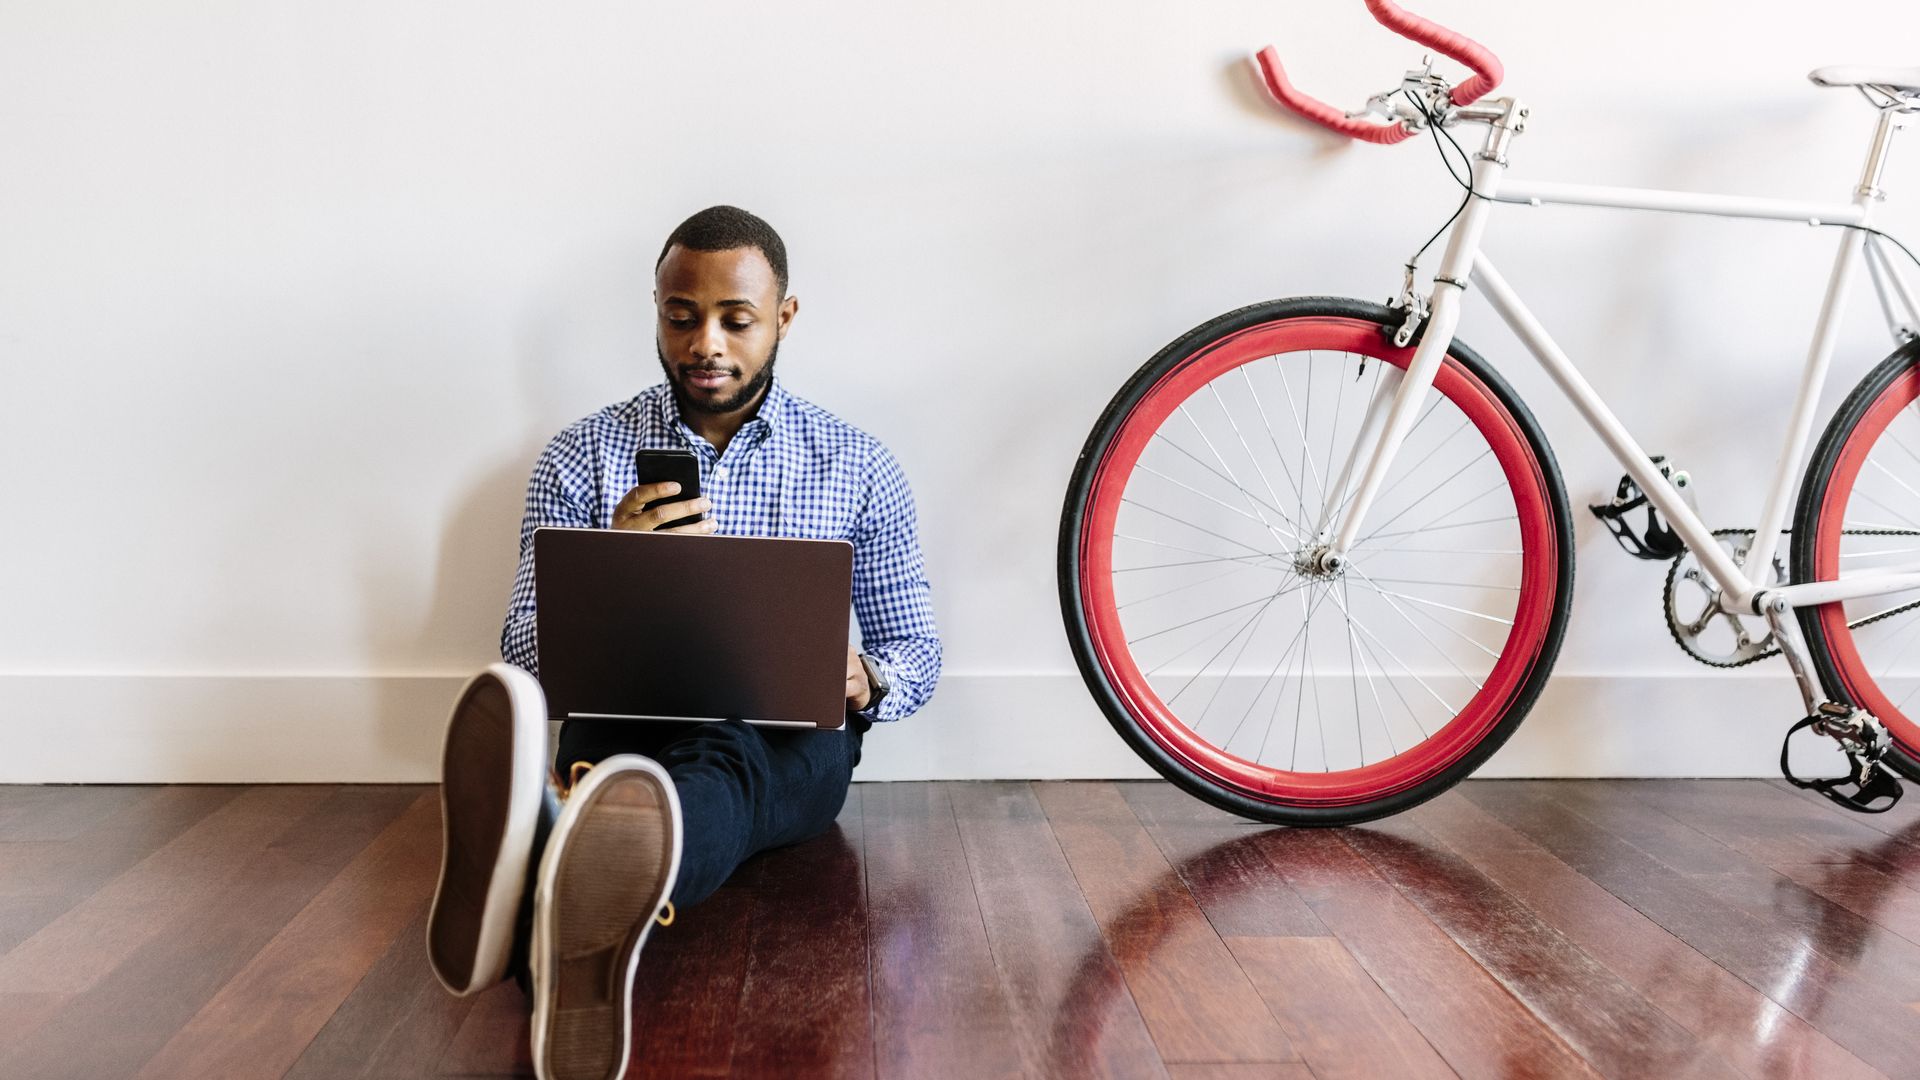 Man with cellphone and laptop leans against wall with bicycle